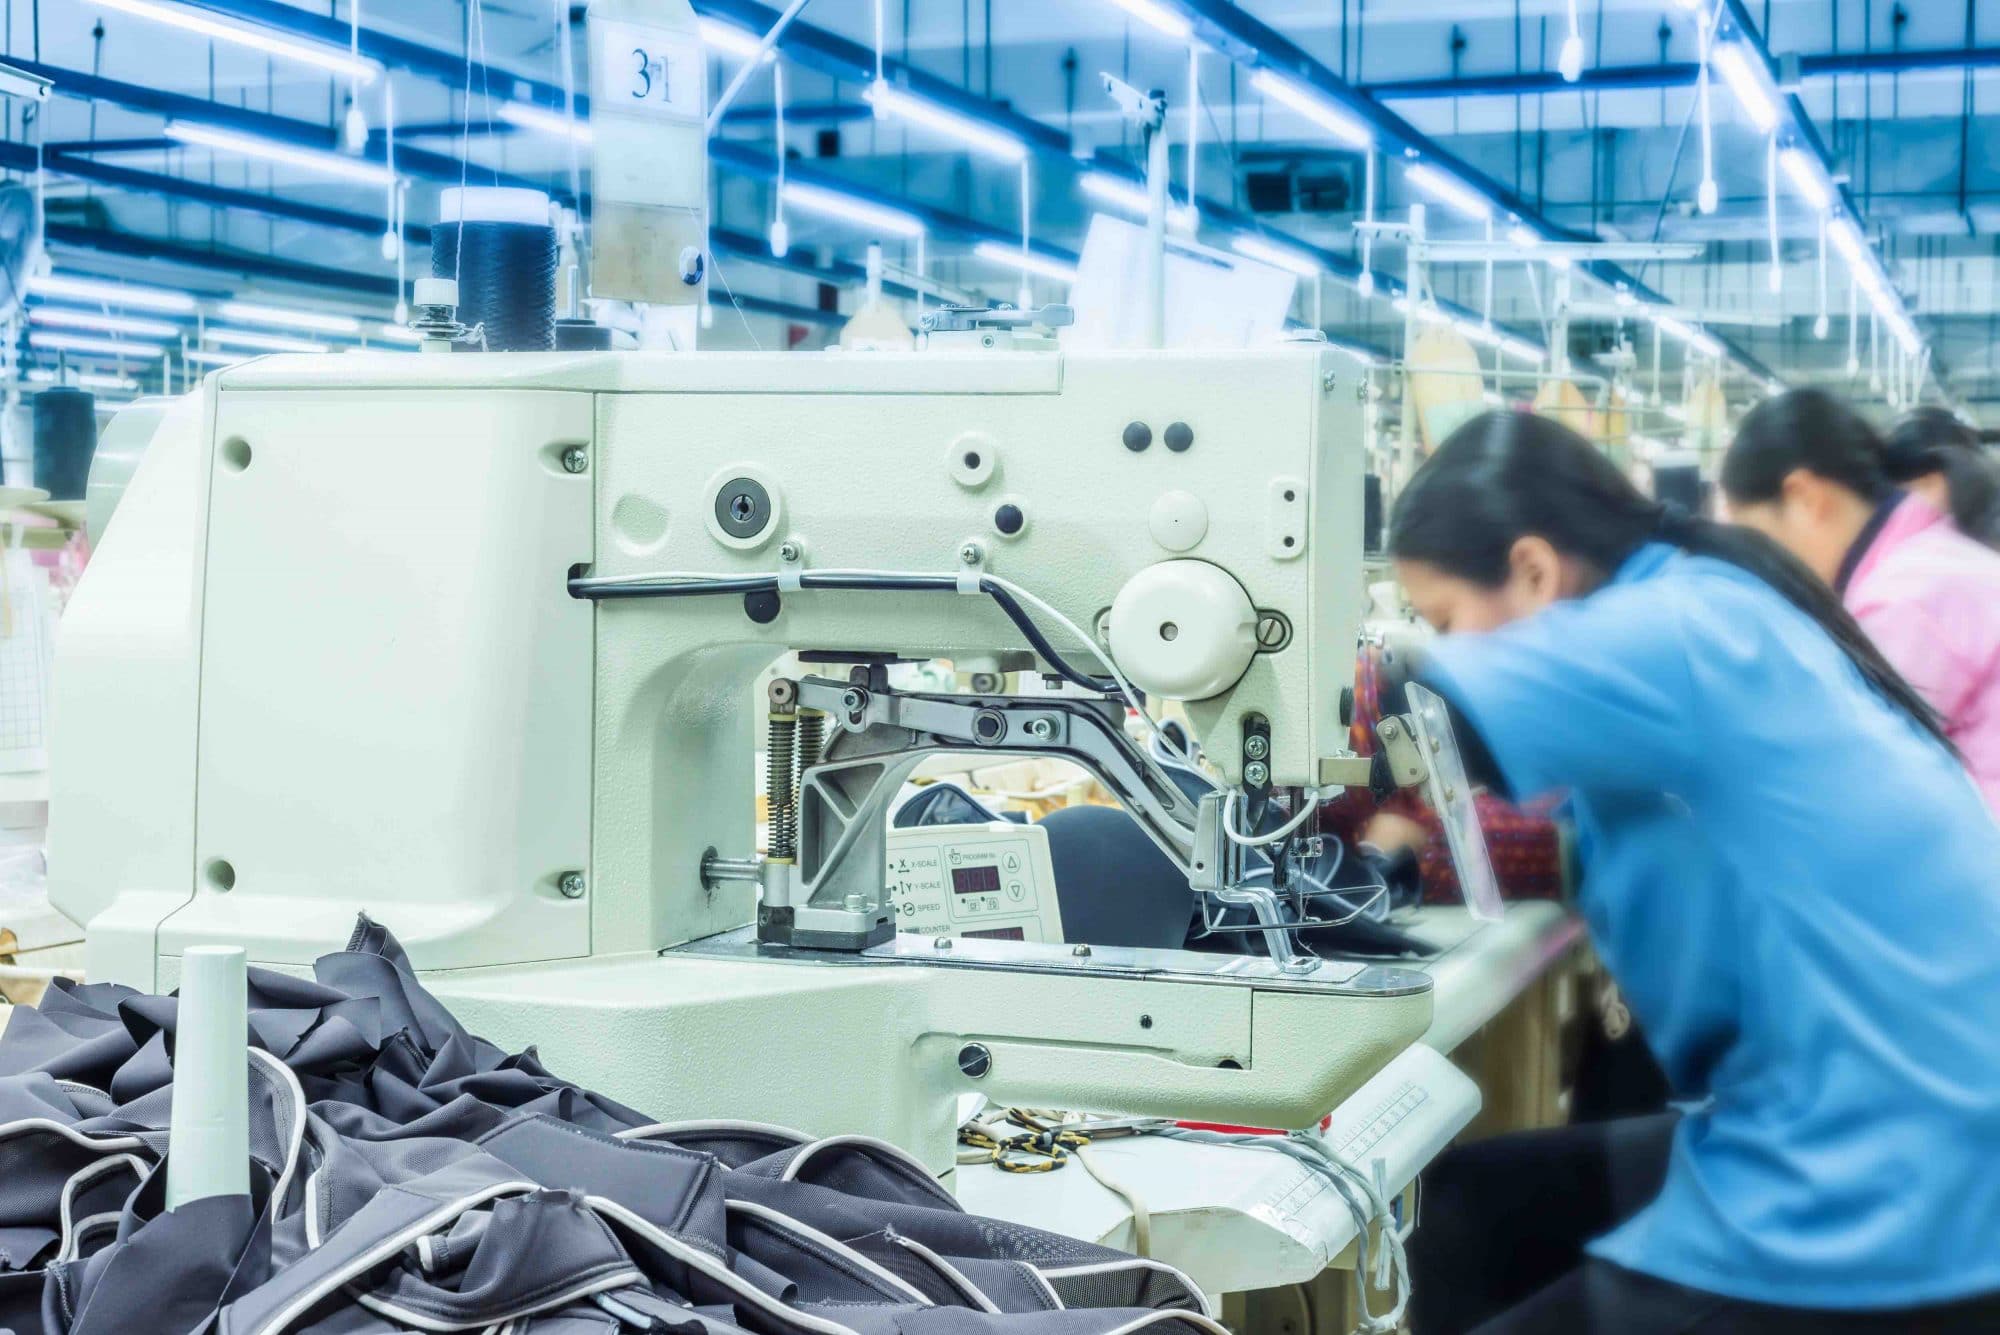 Contract Manufacturing in Mexico  by 258 Consulting, Production and Mexico Supply Chain Expert Consulting, and Supply Chain in Mexico Consultants, https://mexicomanufacturing258.com/